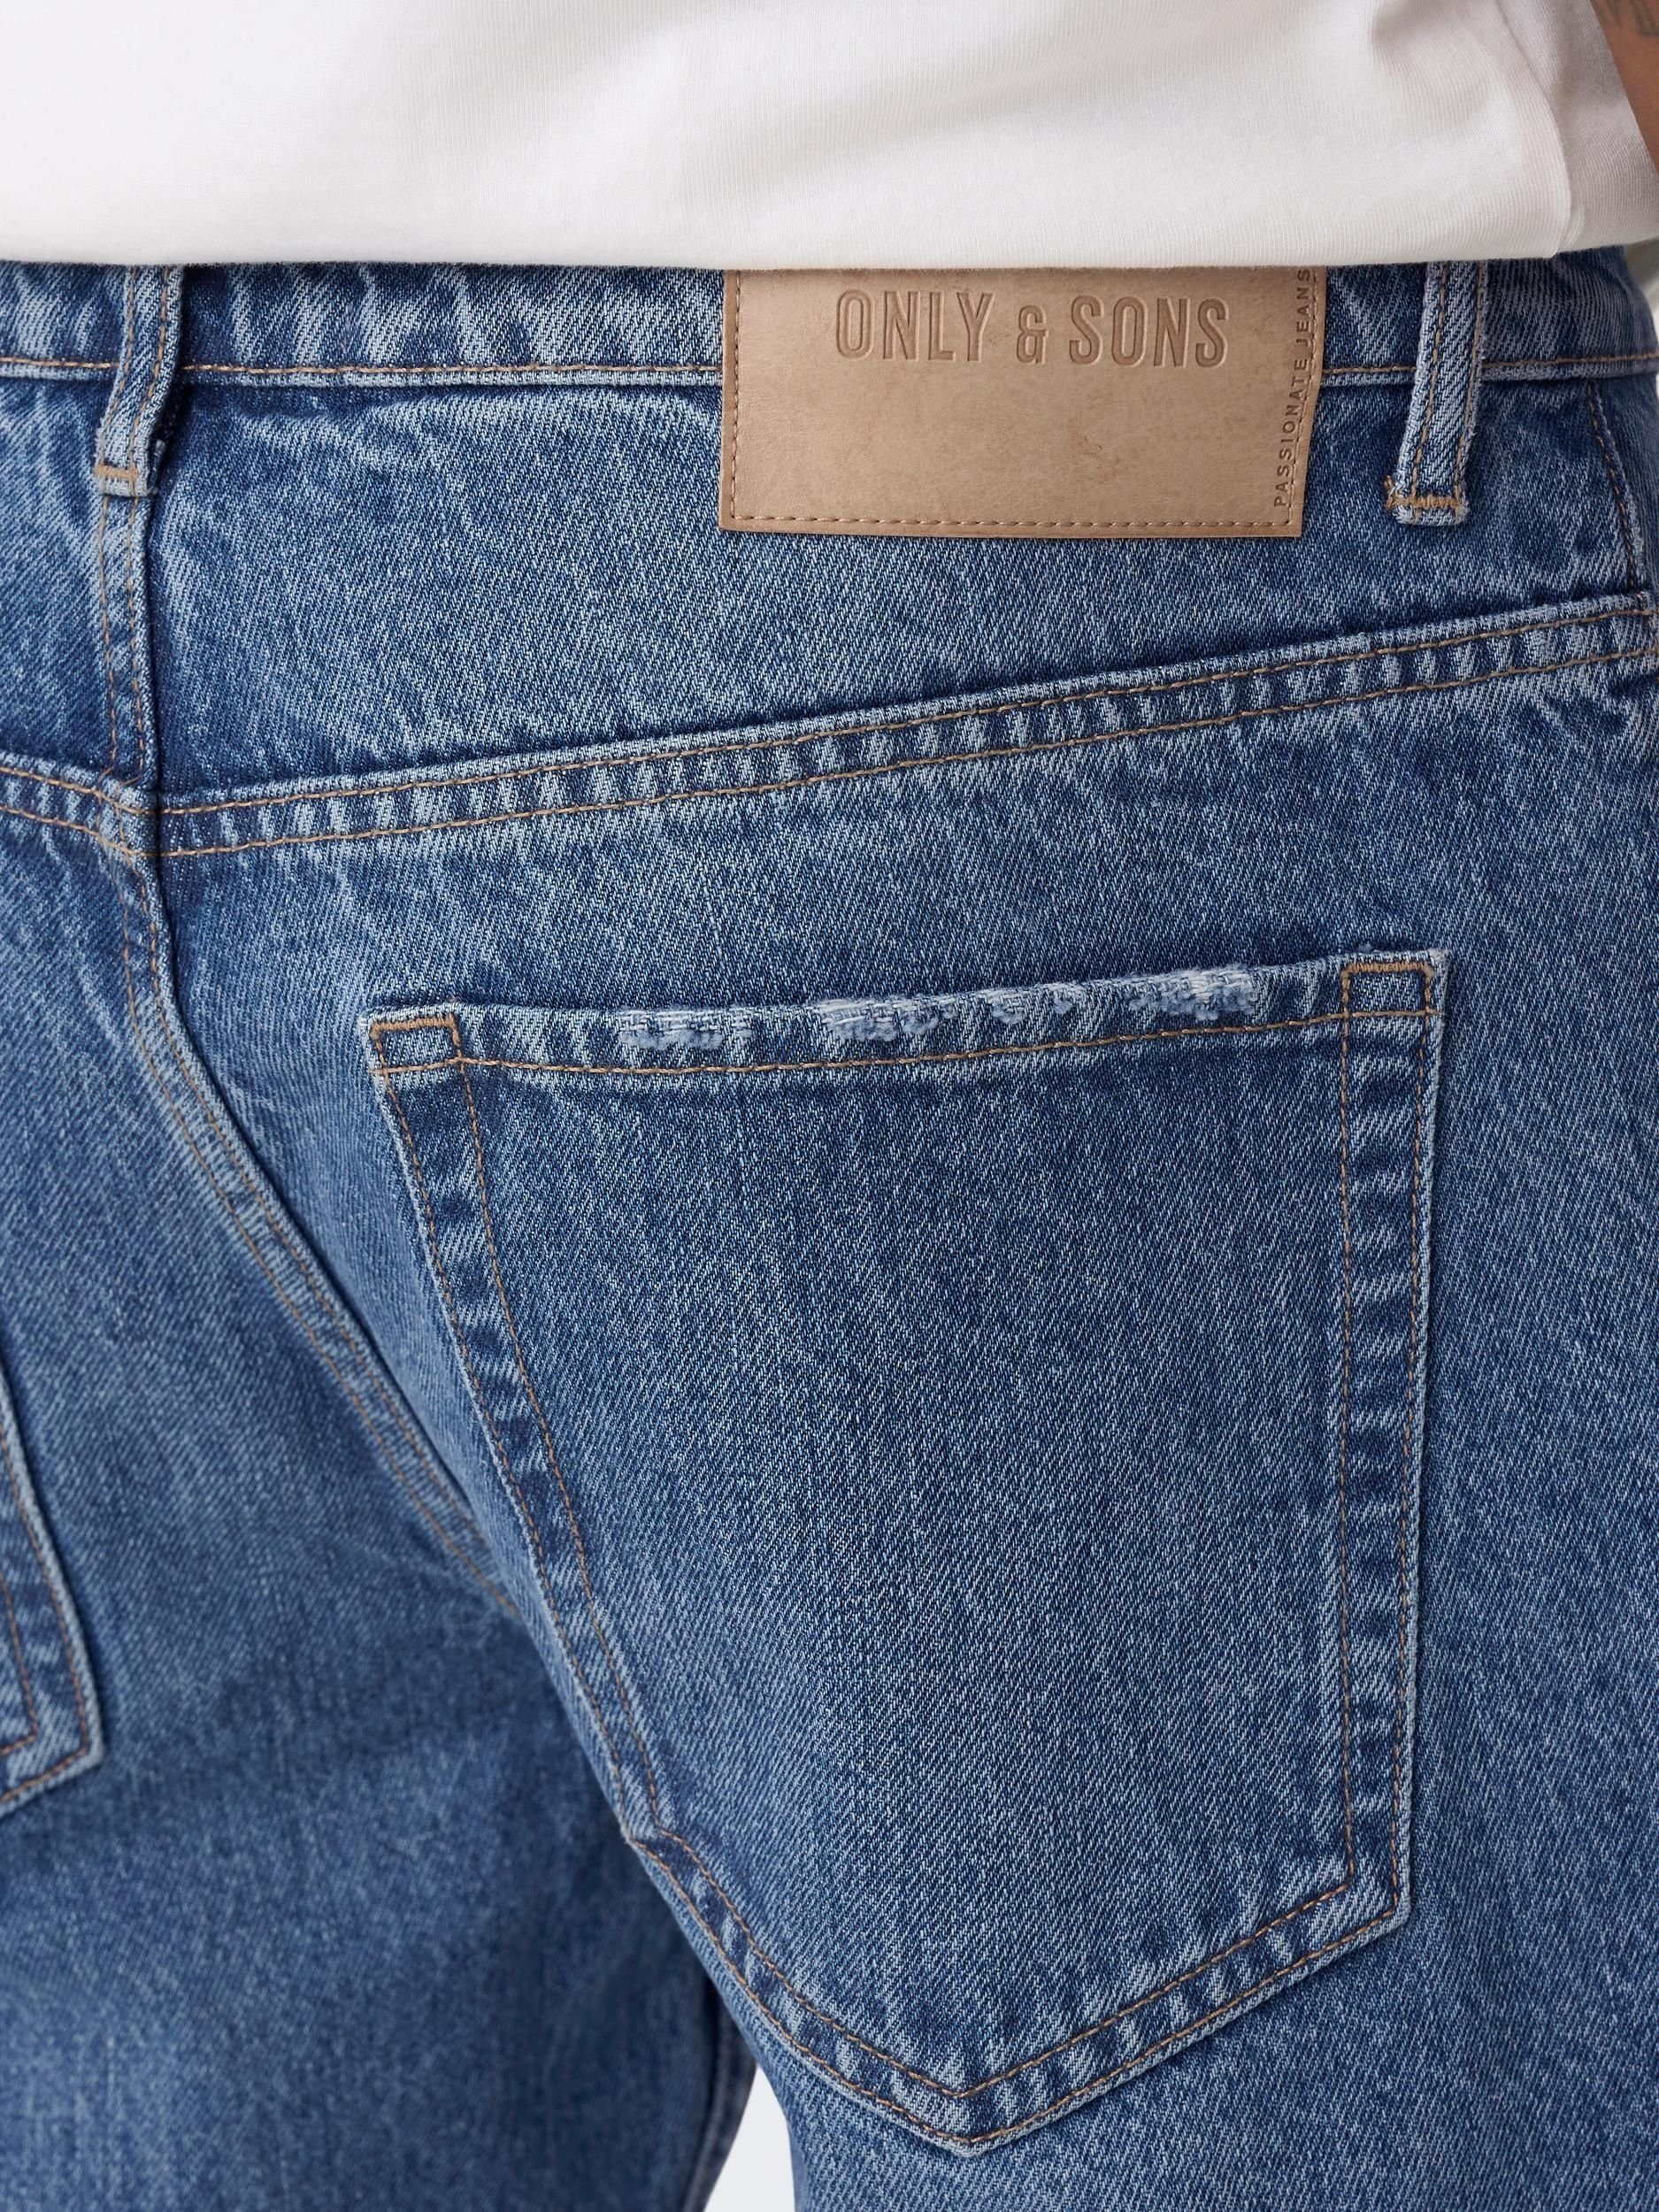 ONLY & Weite Jeans SONS